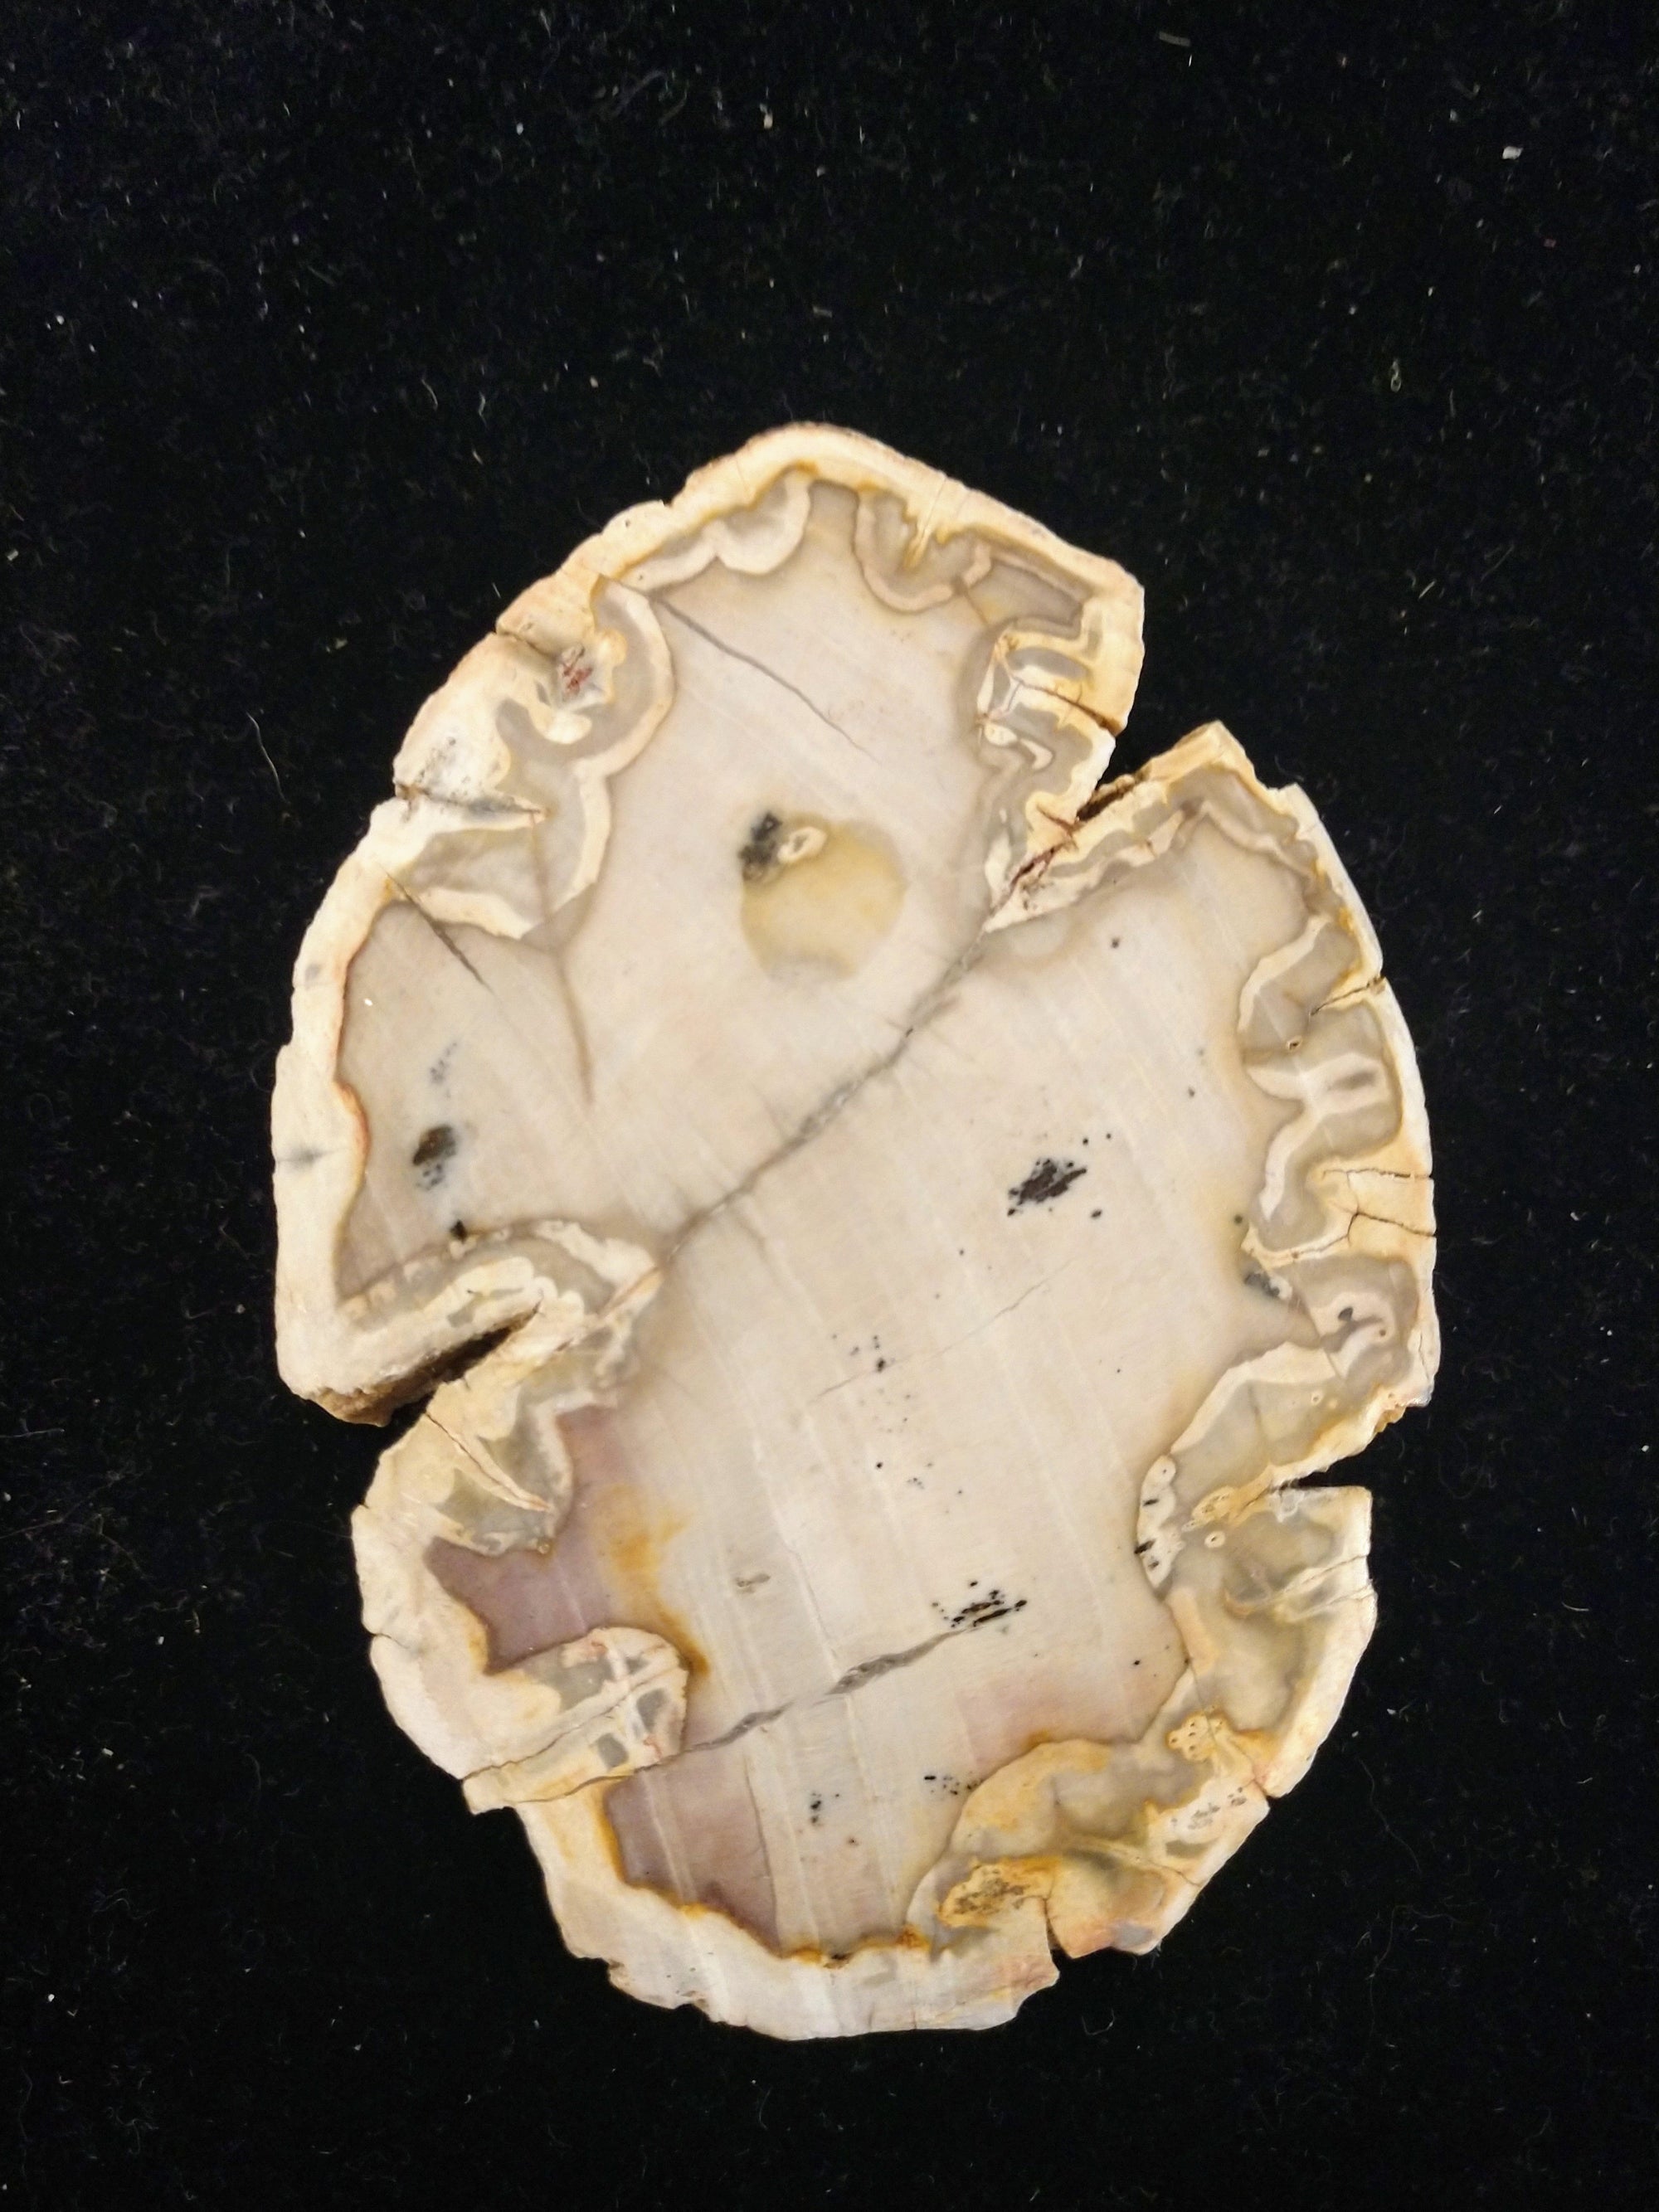 Petrified Wood Slices from Madagascar